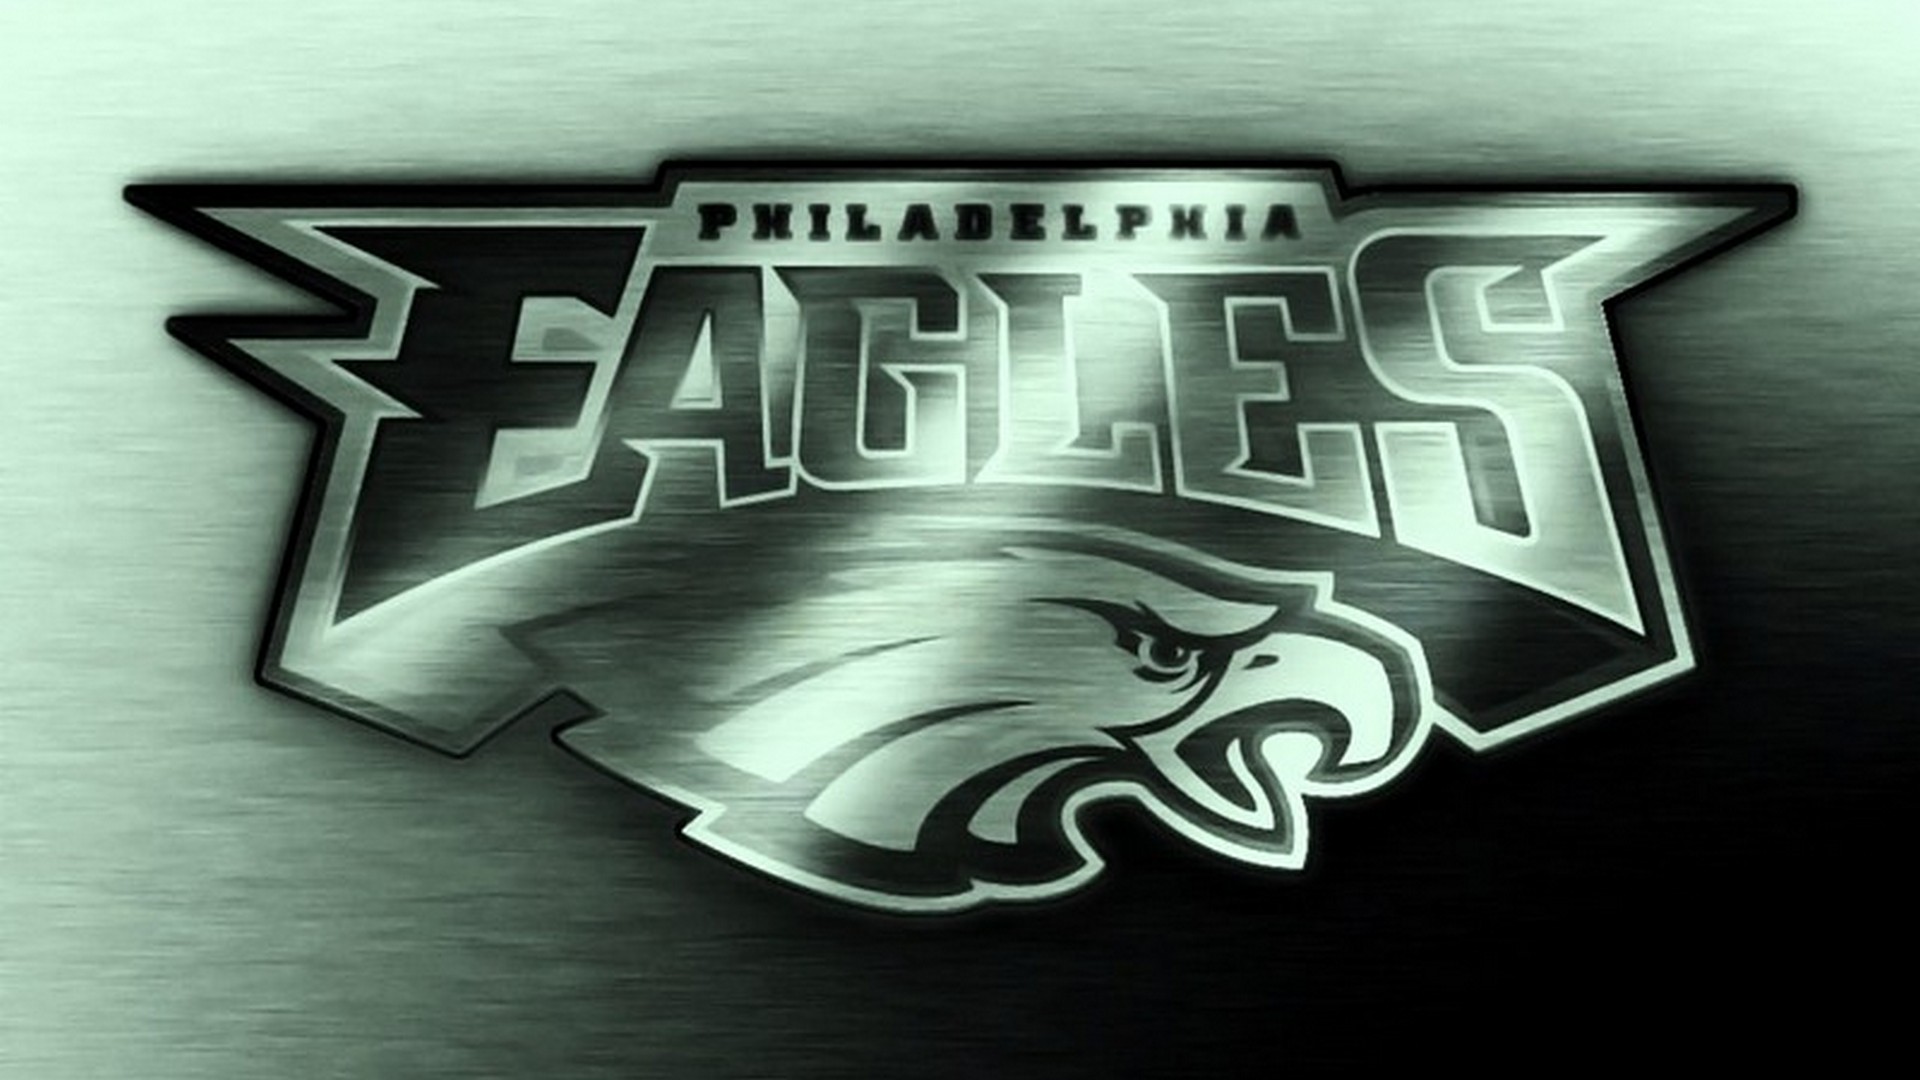 HD Eagles Football Backgrounds with resolution 1920x1080 pixel. You can make this wallpaper for your Mac or Windows Desktop Background, iPhone, Android or Tablet and another Smartphone device